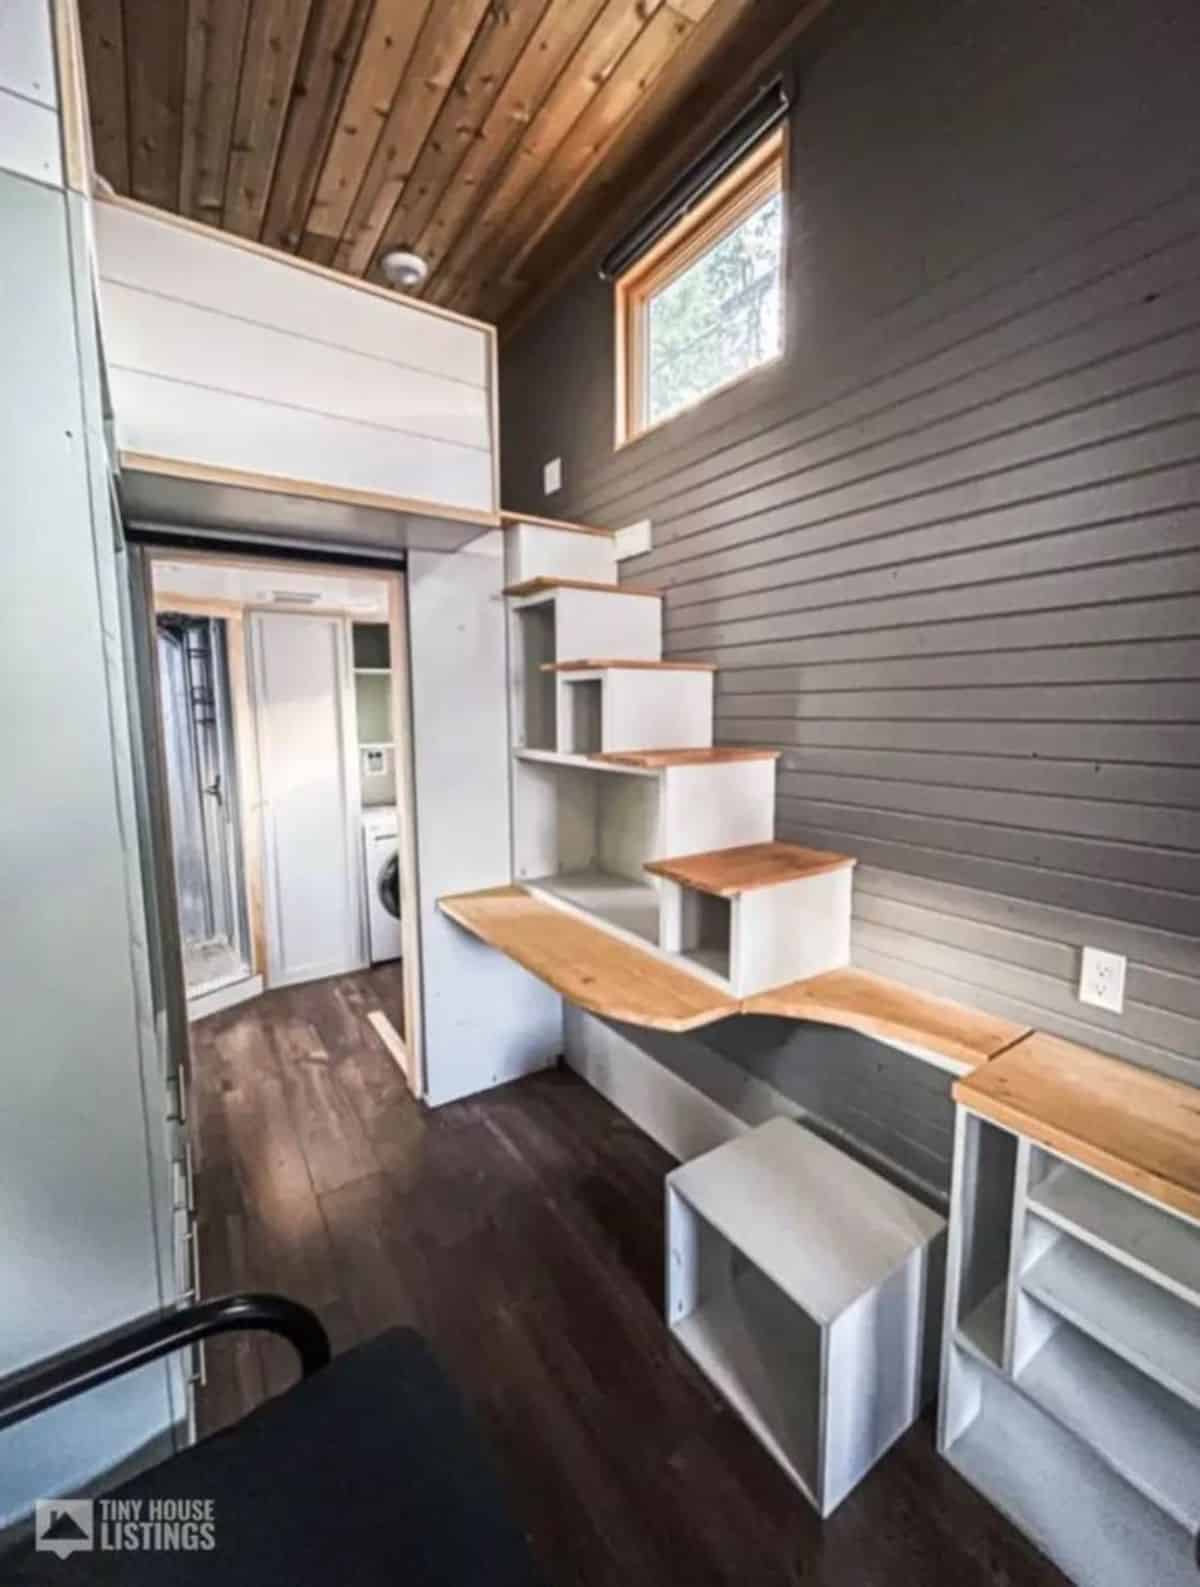 Stairs cum storage space underneath leading to the loft bedroom of Professionally Built 30' Tiny House